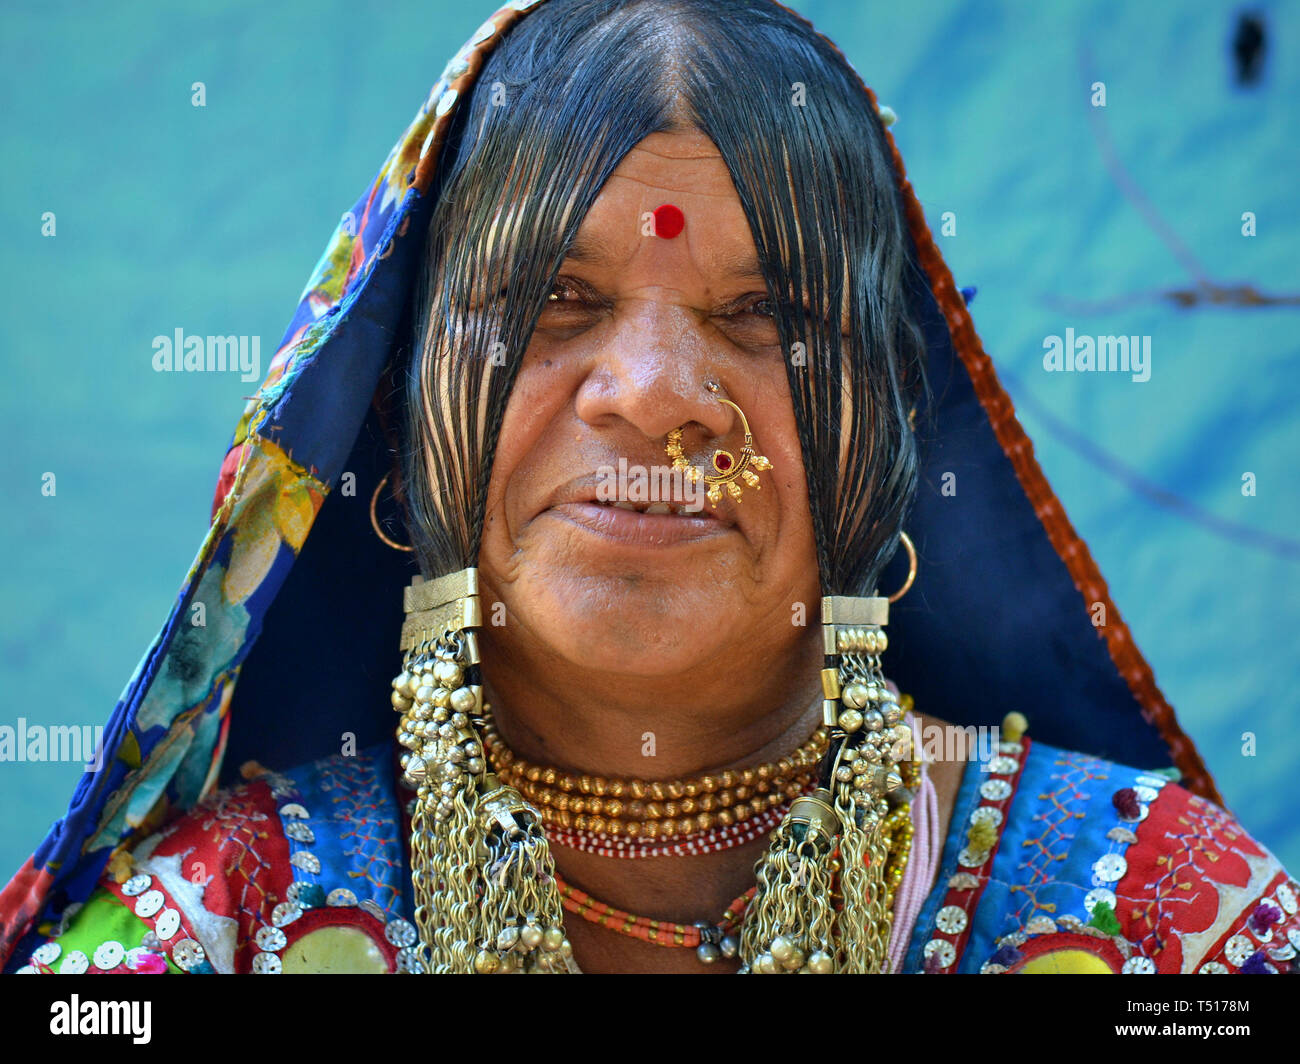 Elderly Indian Banjara tribal woman from Karnataka wears nose jewelry, embroidered tribal garment and headscarf with buttons, shiny discs and beads. Stock Photo